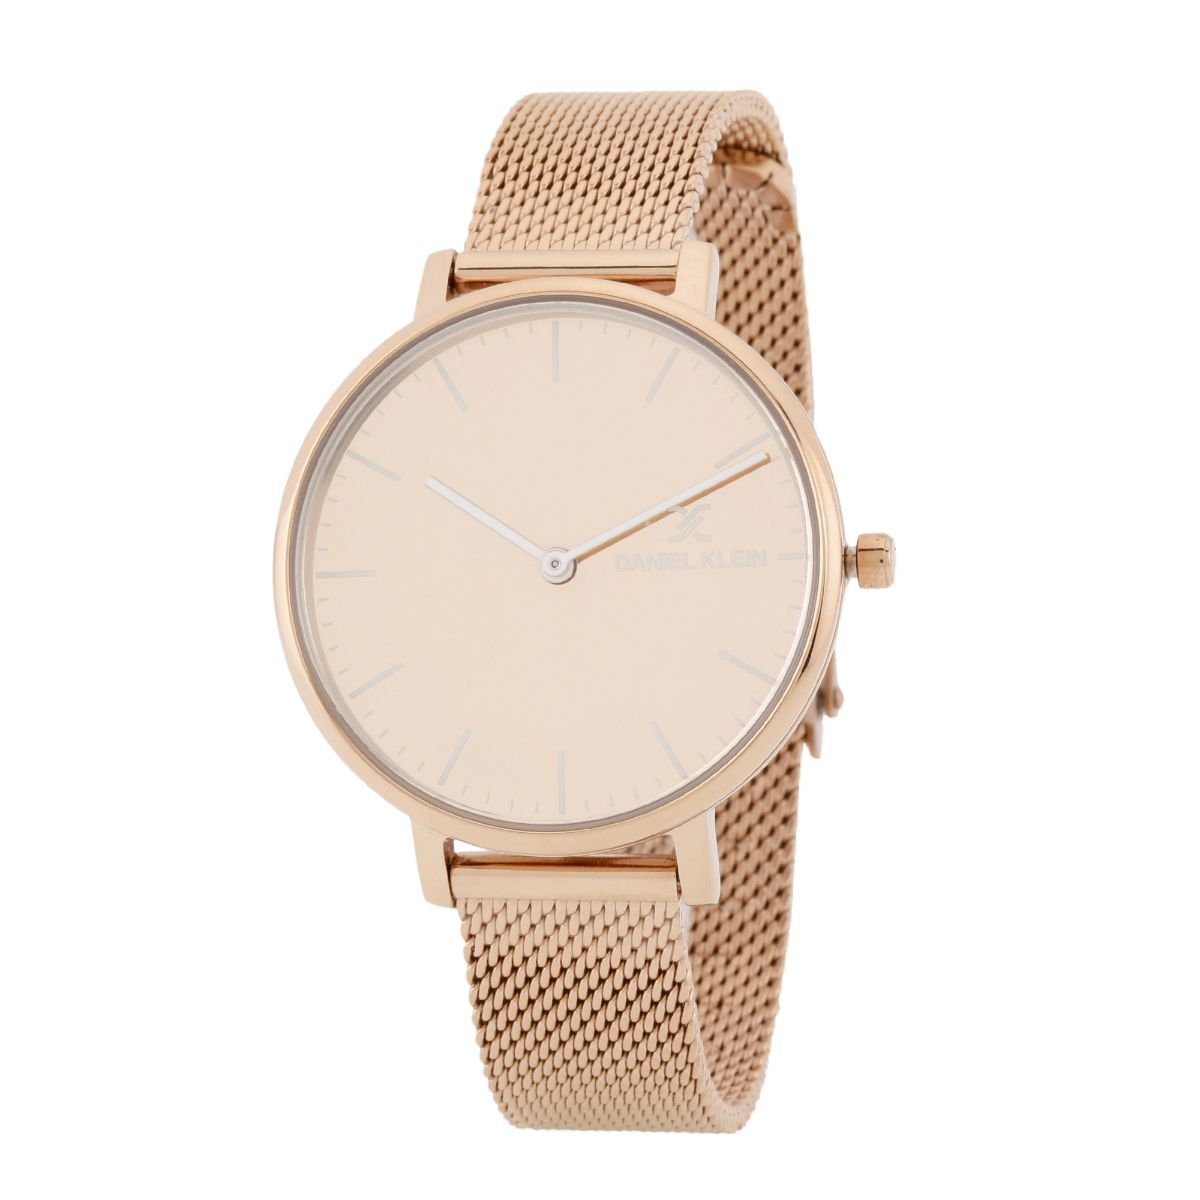 Upto 50% Off On Titan Watches | Fashion store, Best online shopping sites,  Womens watches